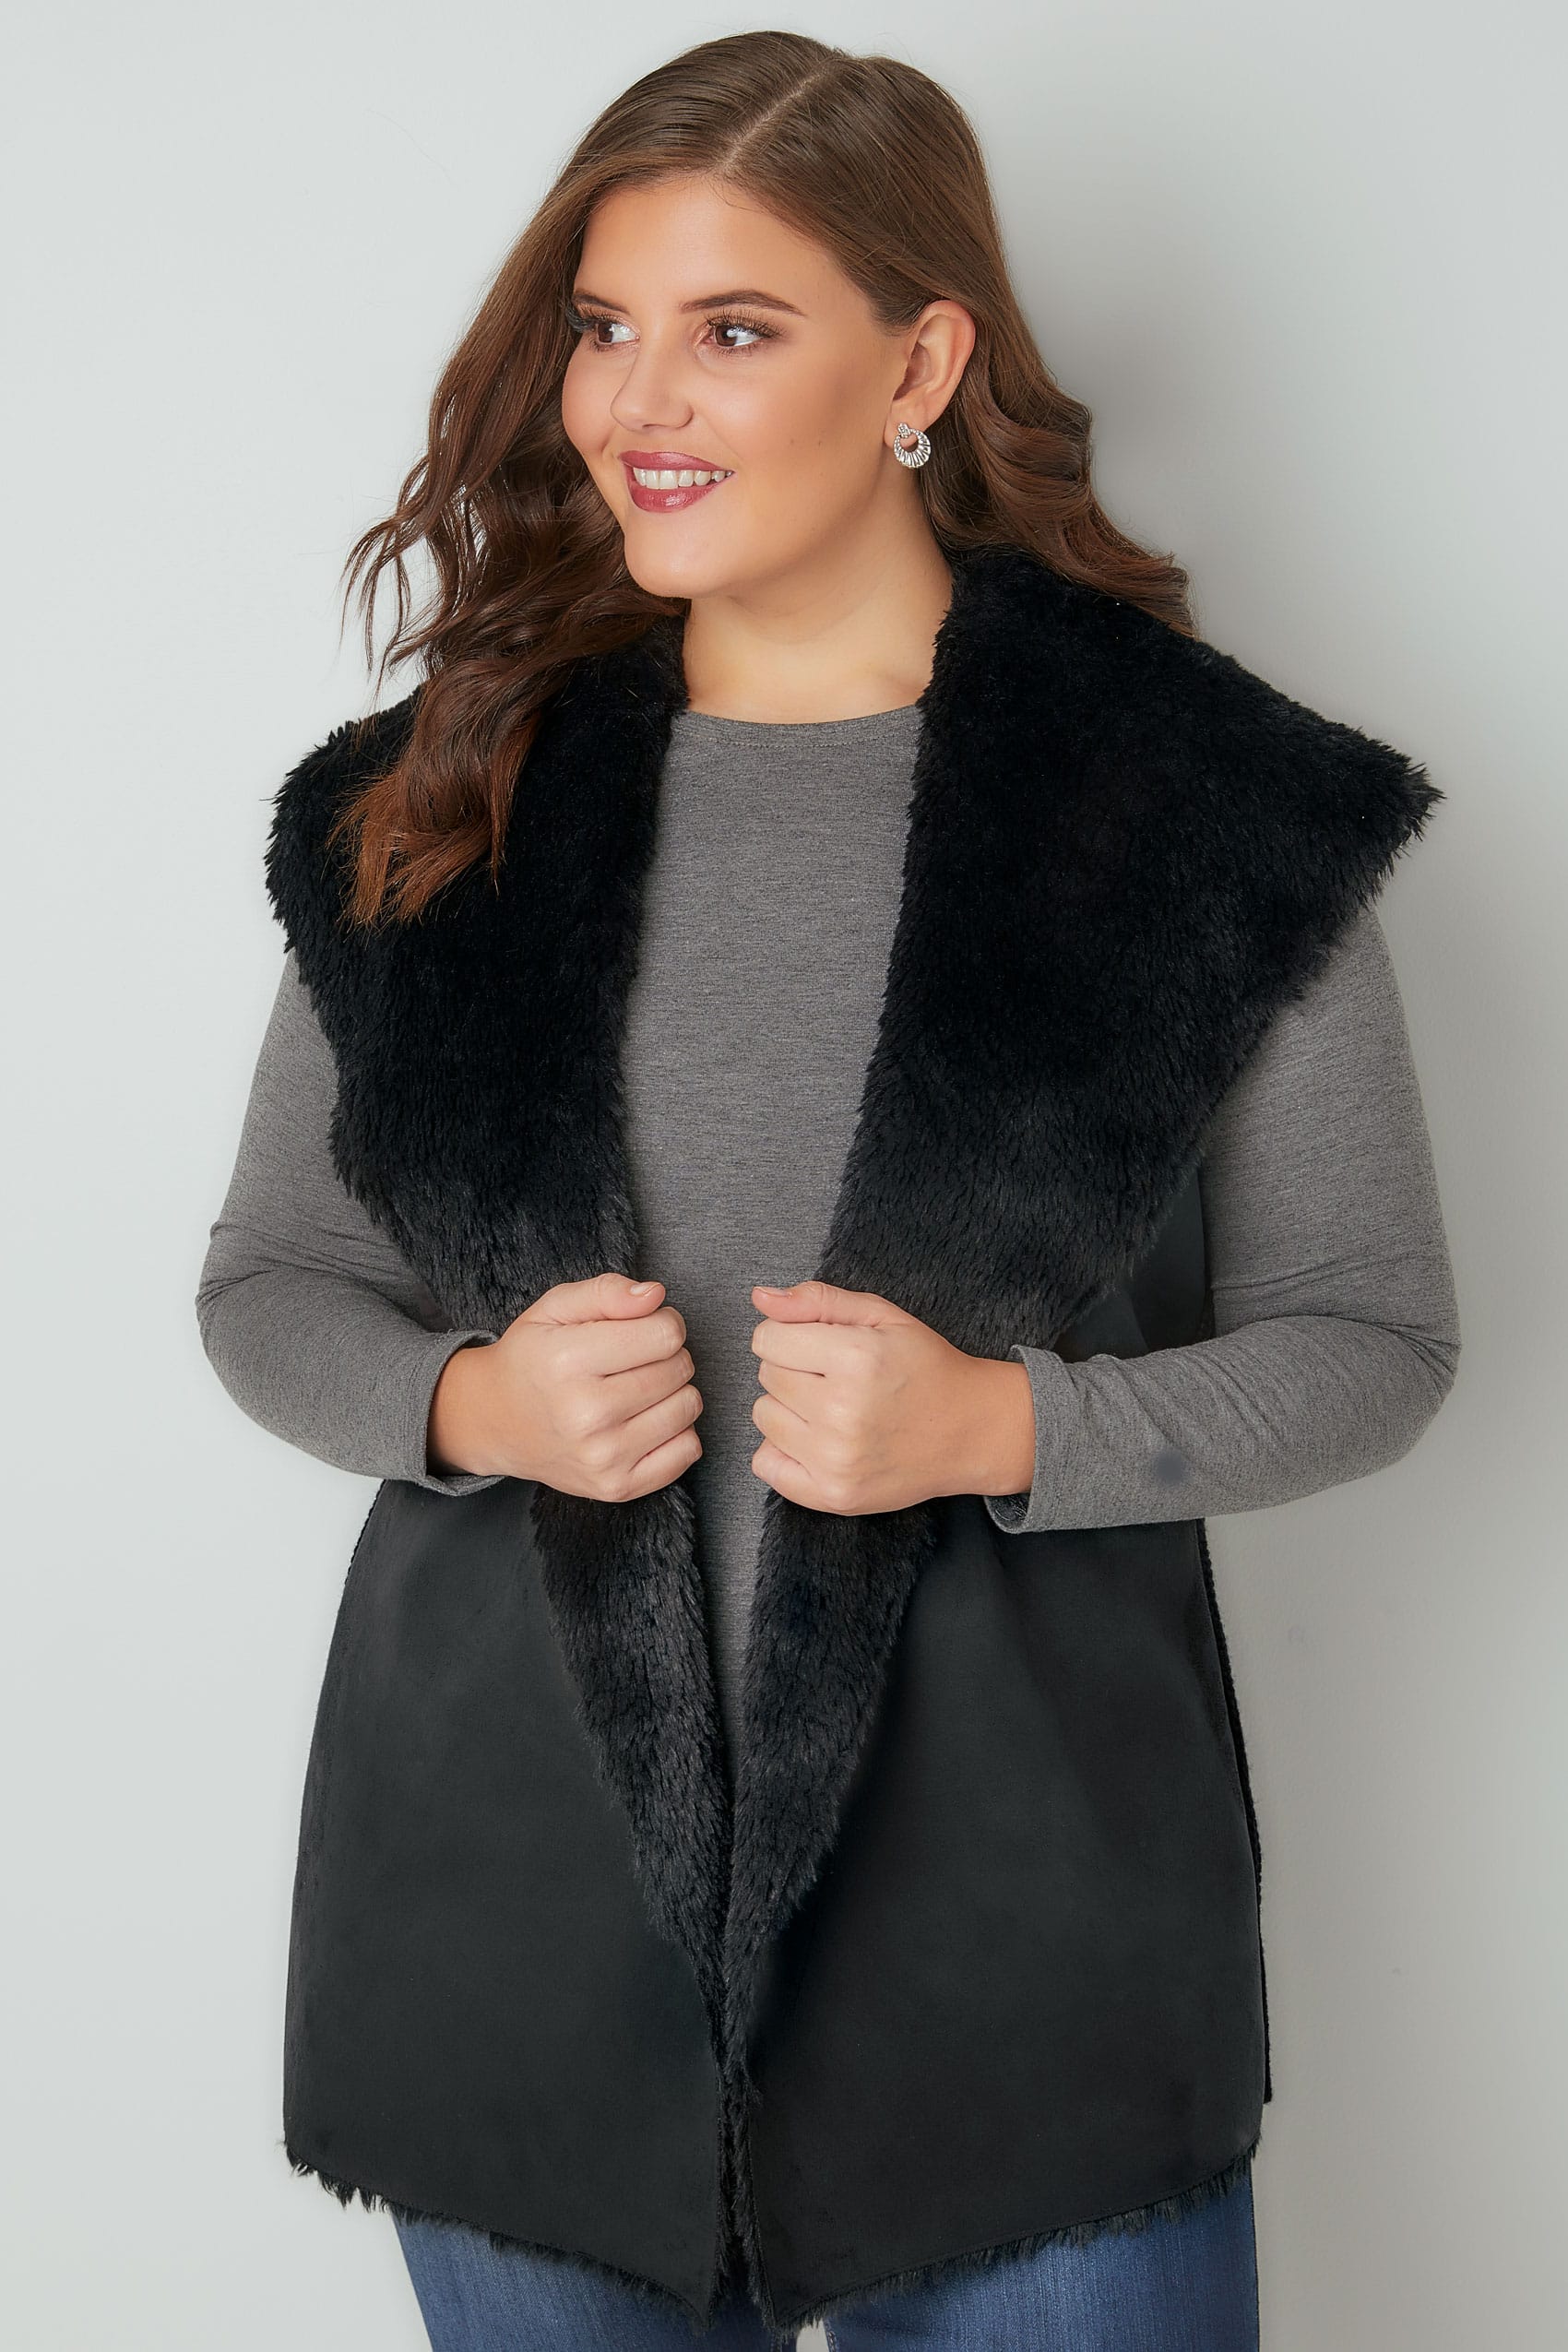 Black Faux Fur Sleeveless Cable Knit Gilet, Plus size 16 to 36